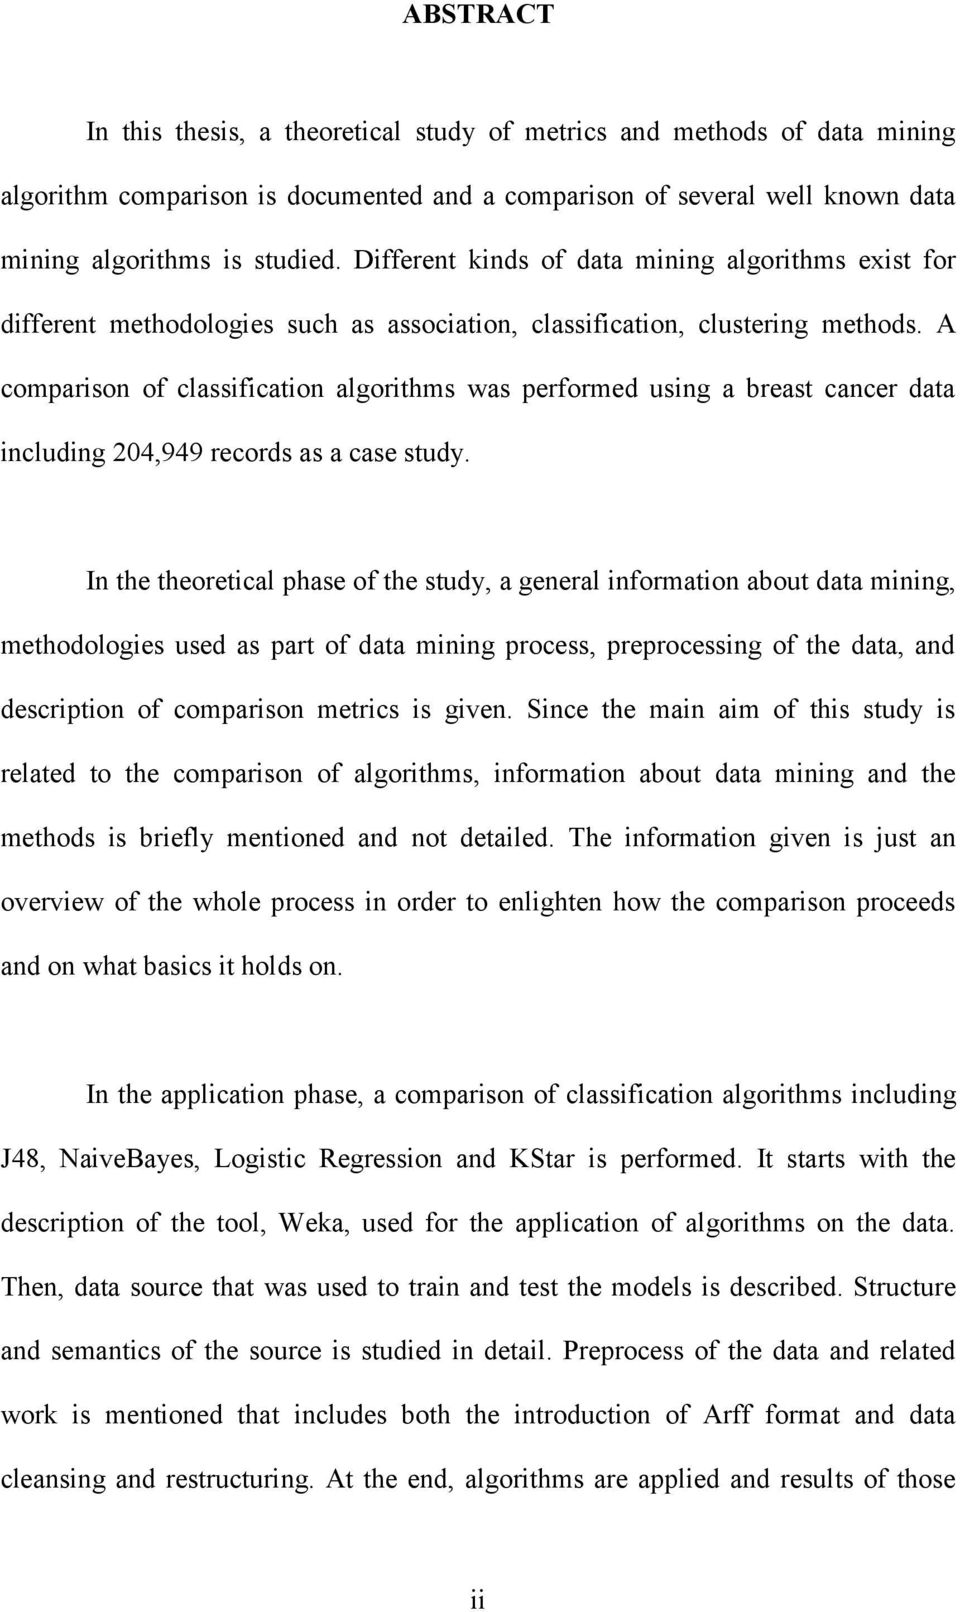 A comparison of classification algorithms was performed using a breast cancer data including 204,949 records as a case study.